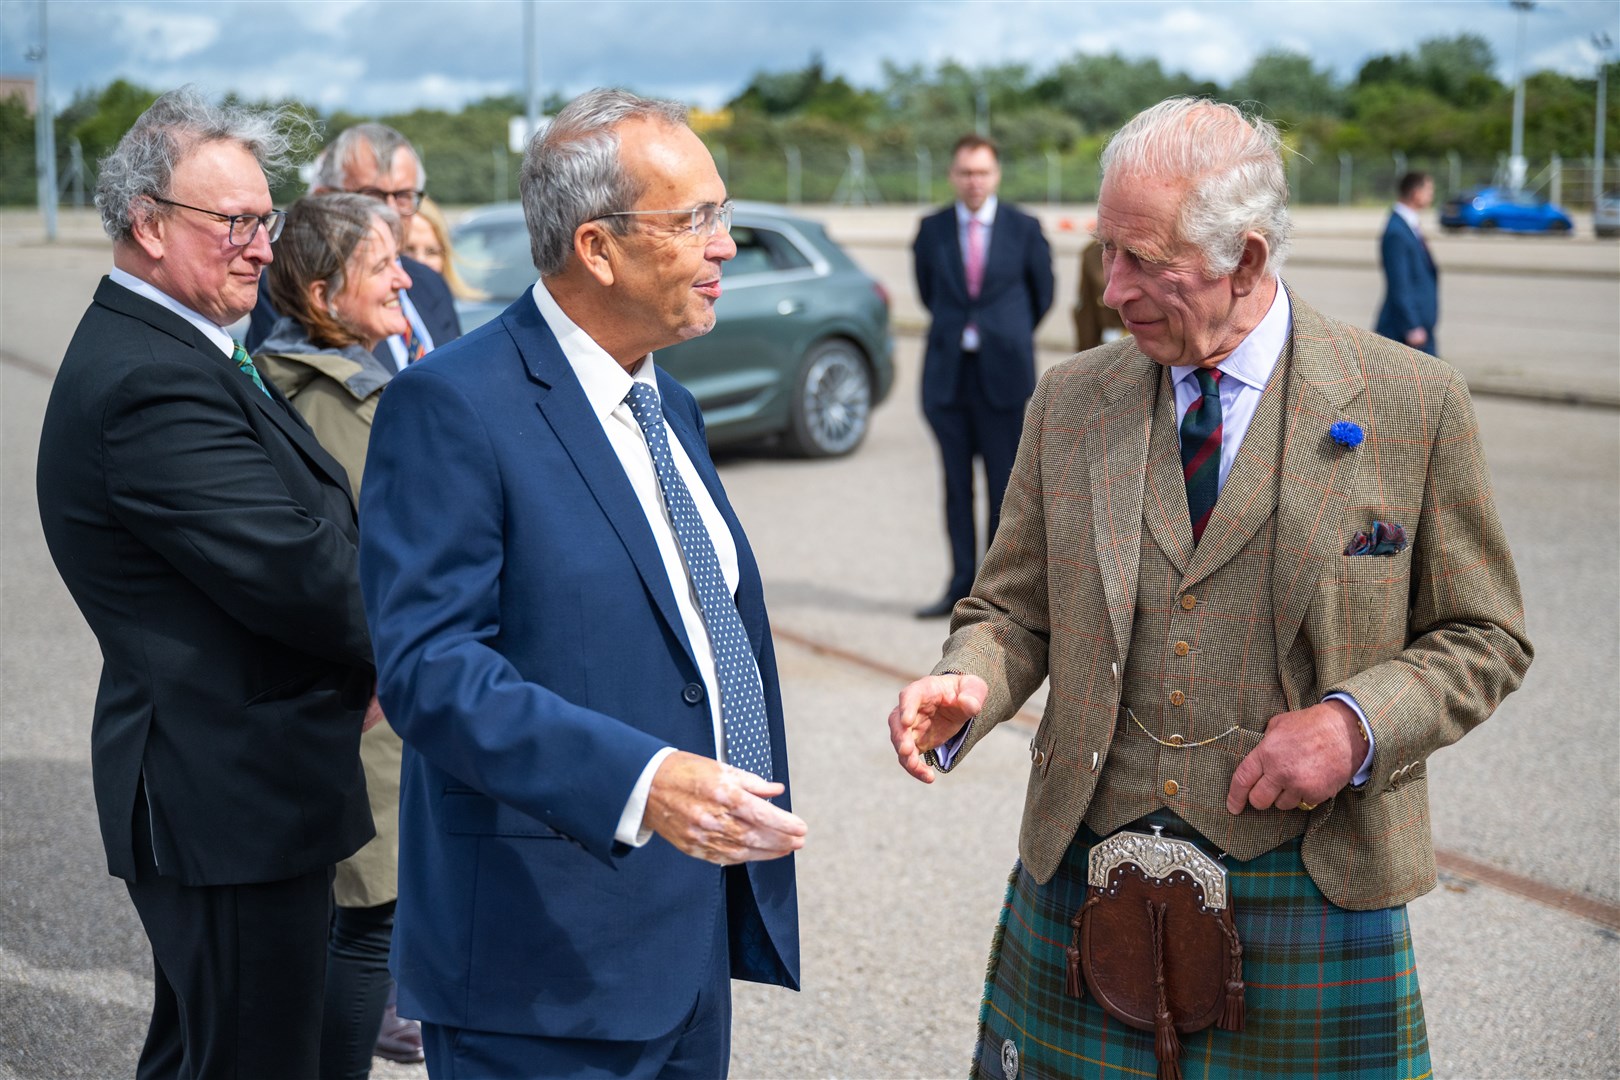 GEG chairman Roy MacGregor and officials greet King Charles III at the Nigg site.